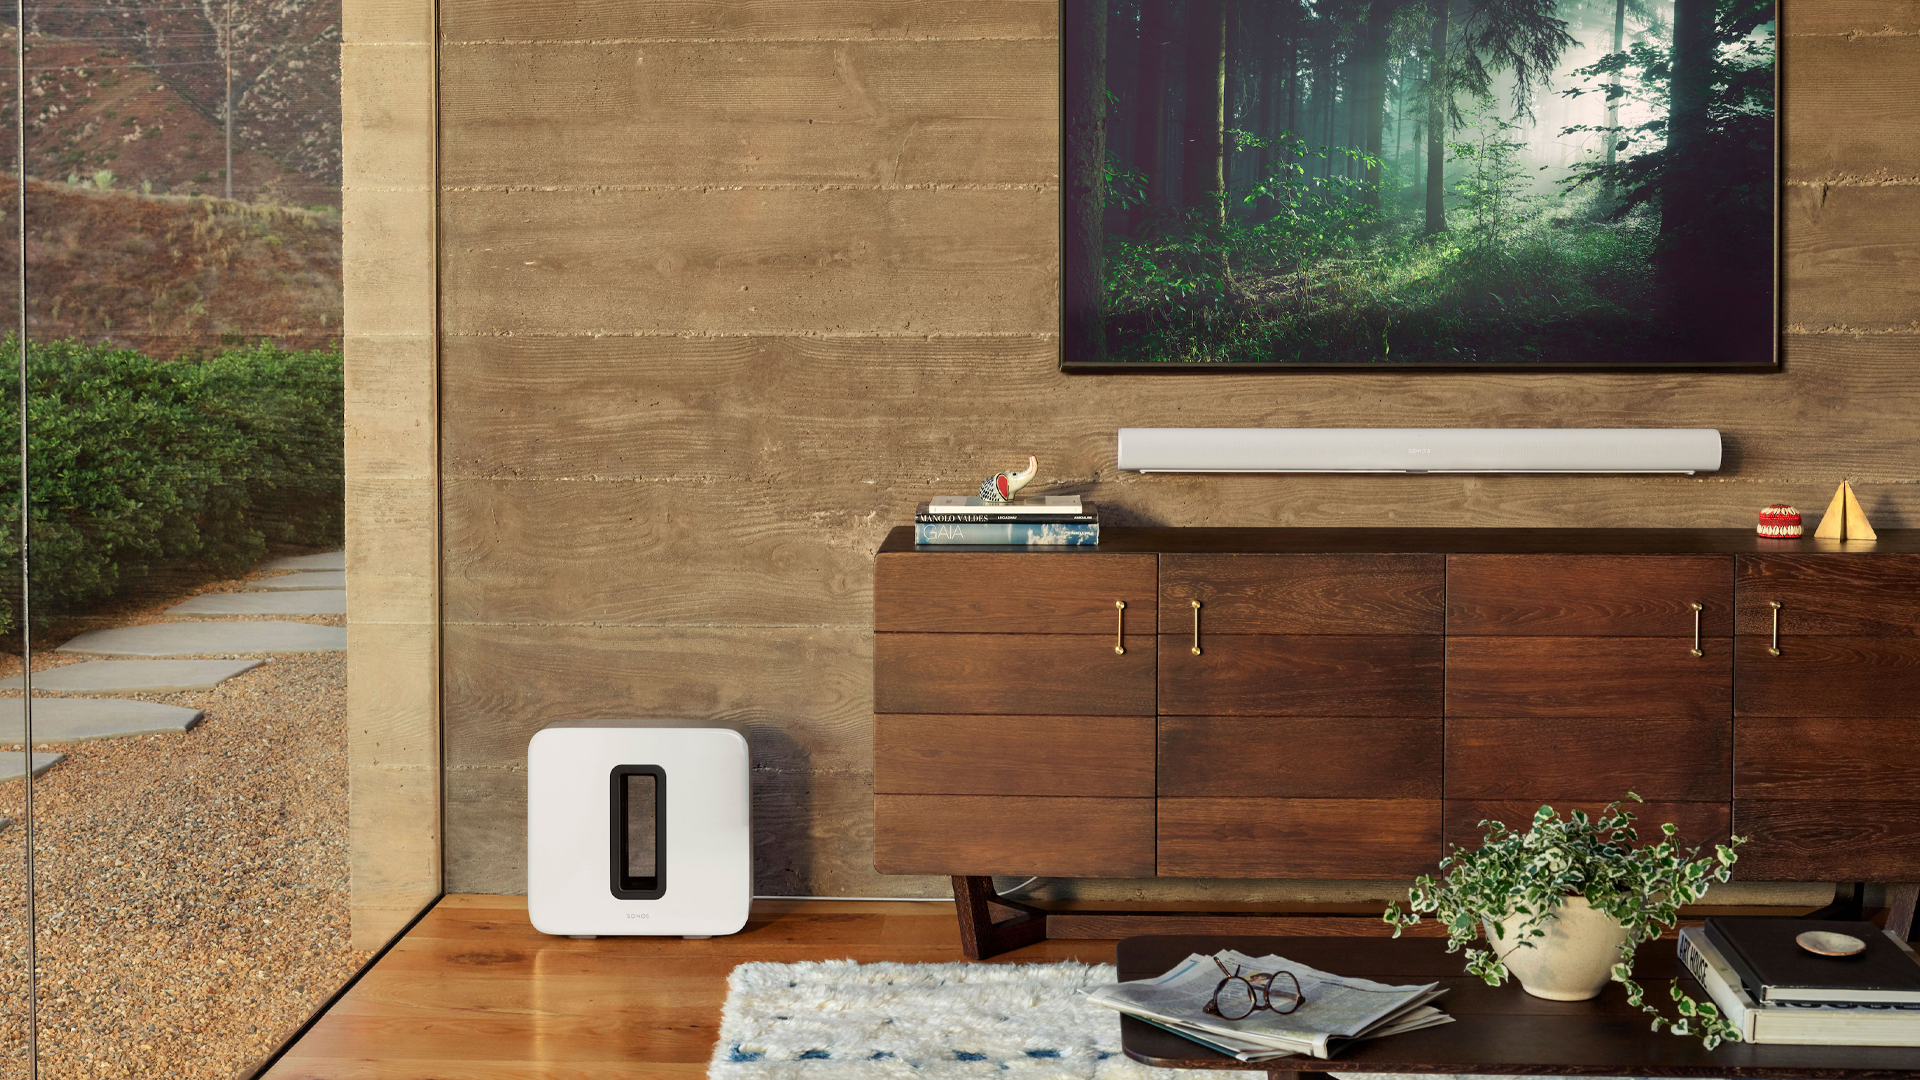 The Sonos Arc white soundbar with the Sonos Sub in white in a wooden living room